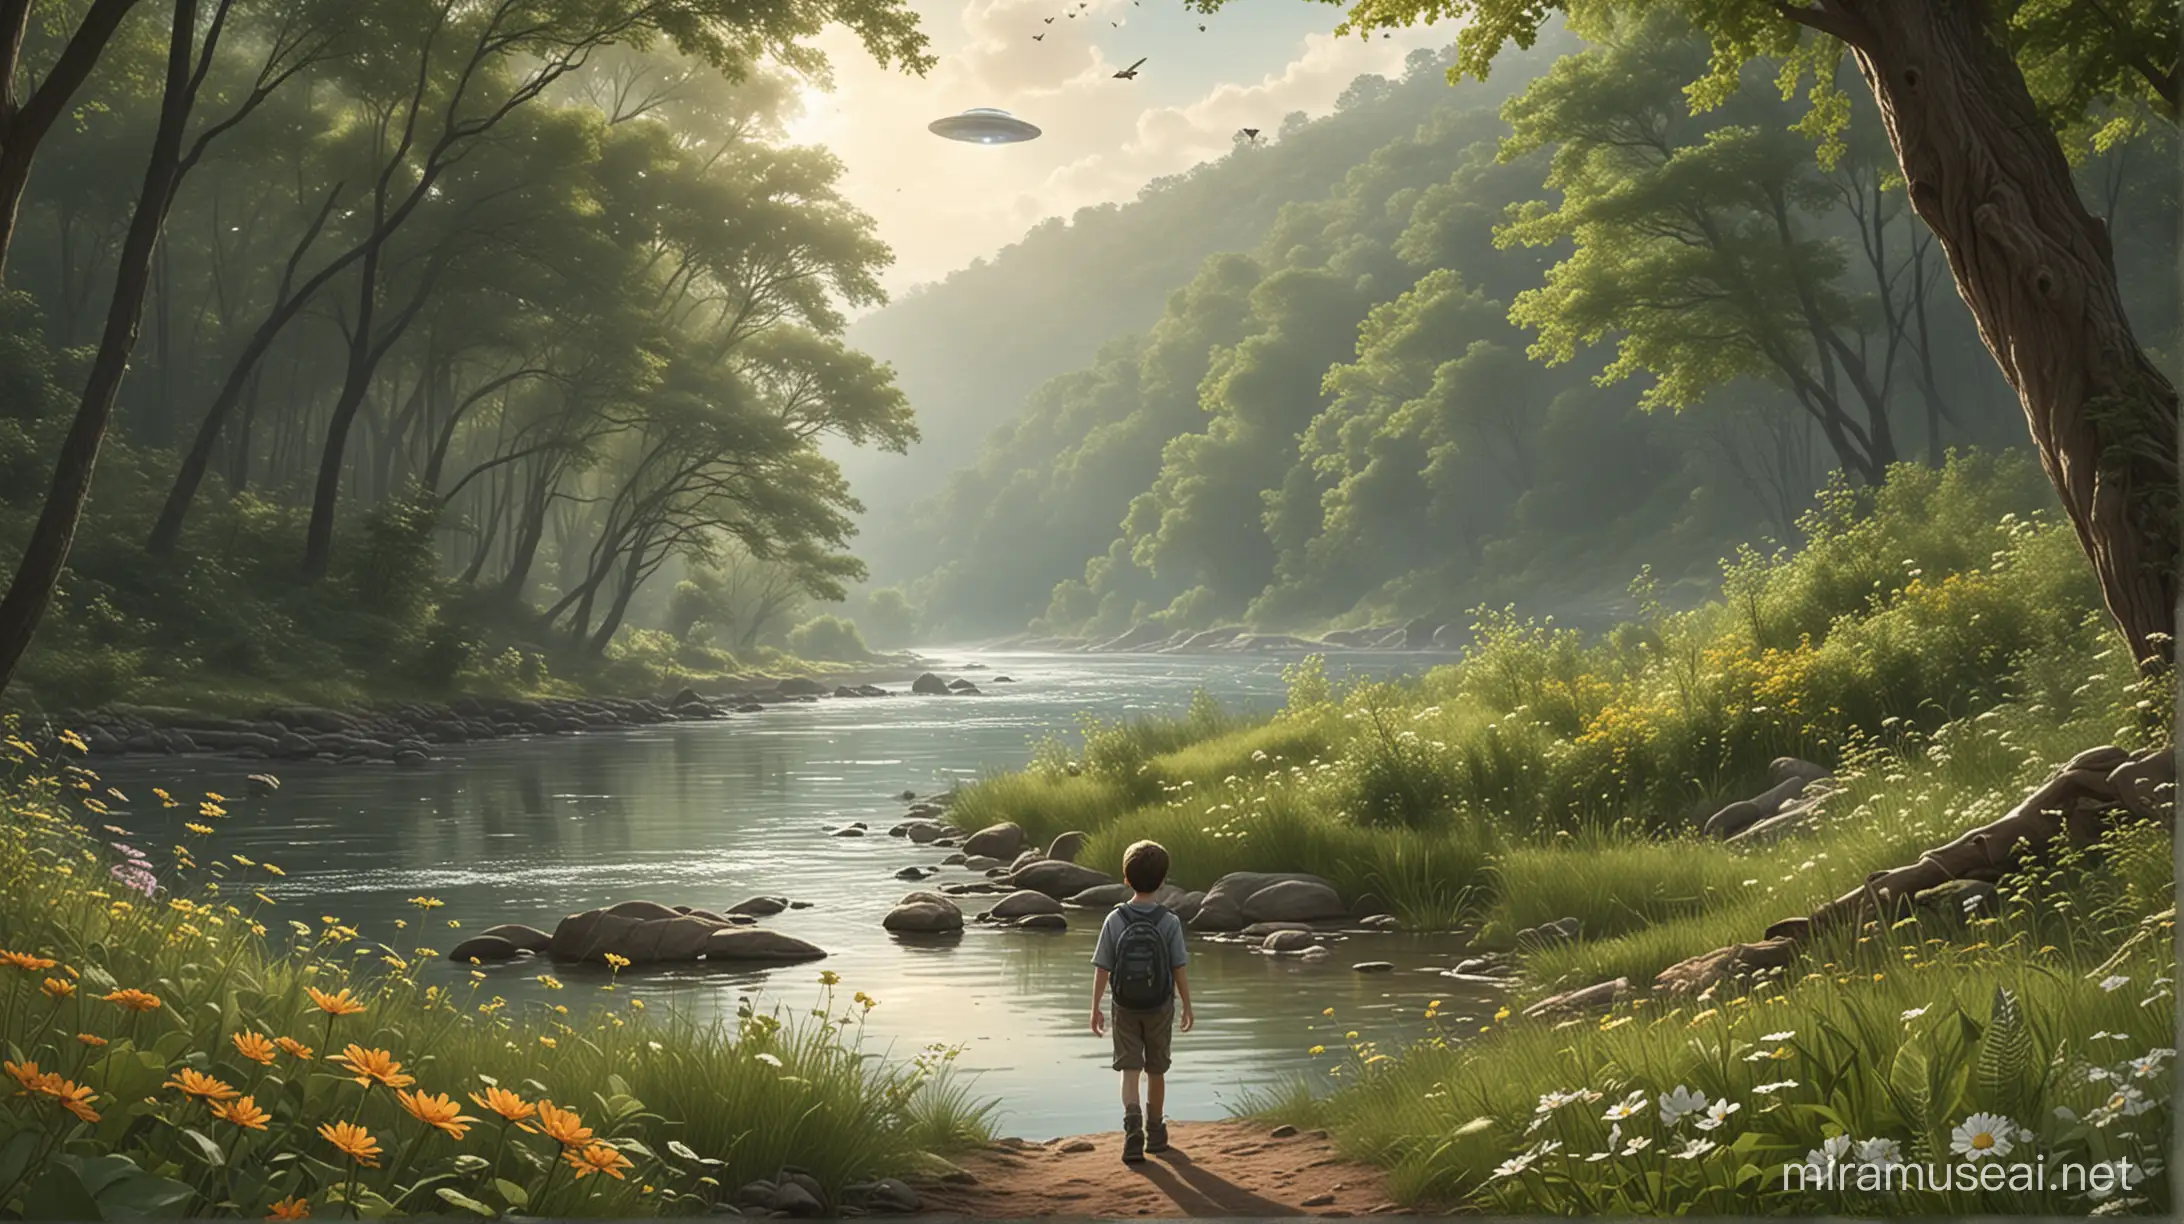 Could you please generate illustrations/photos to accompany a story about a boy named Tom who goes on a nature hike with his mother? Alien UFO, The story emphasizes the beauty and importance of nature, with scenes including trees, flowers, insects, a river, and the boy's exploration and learning experiences